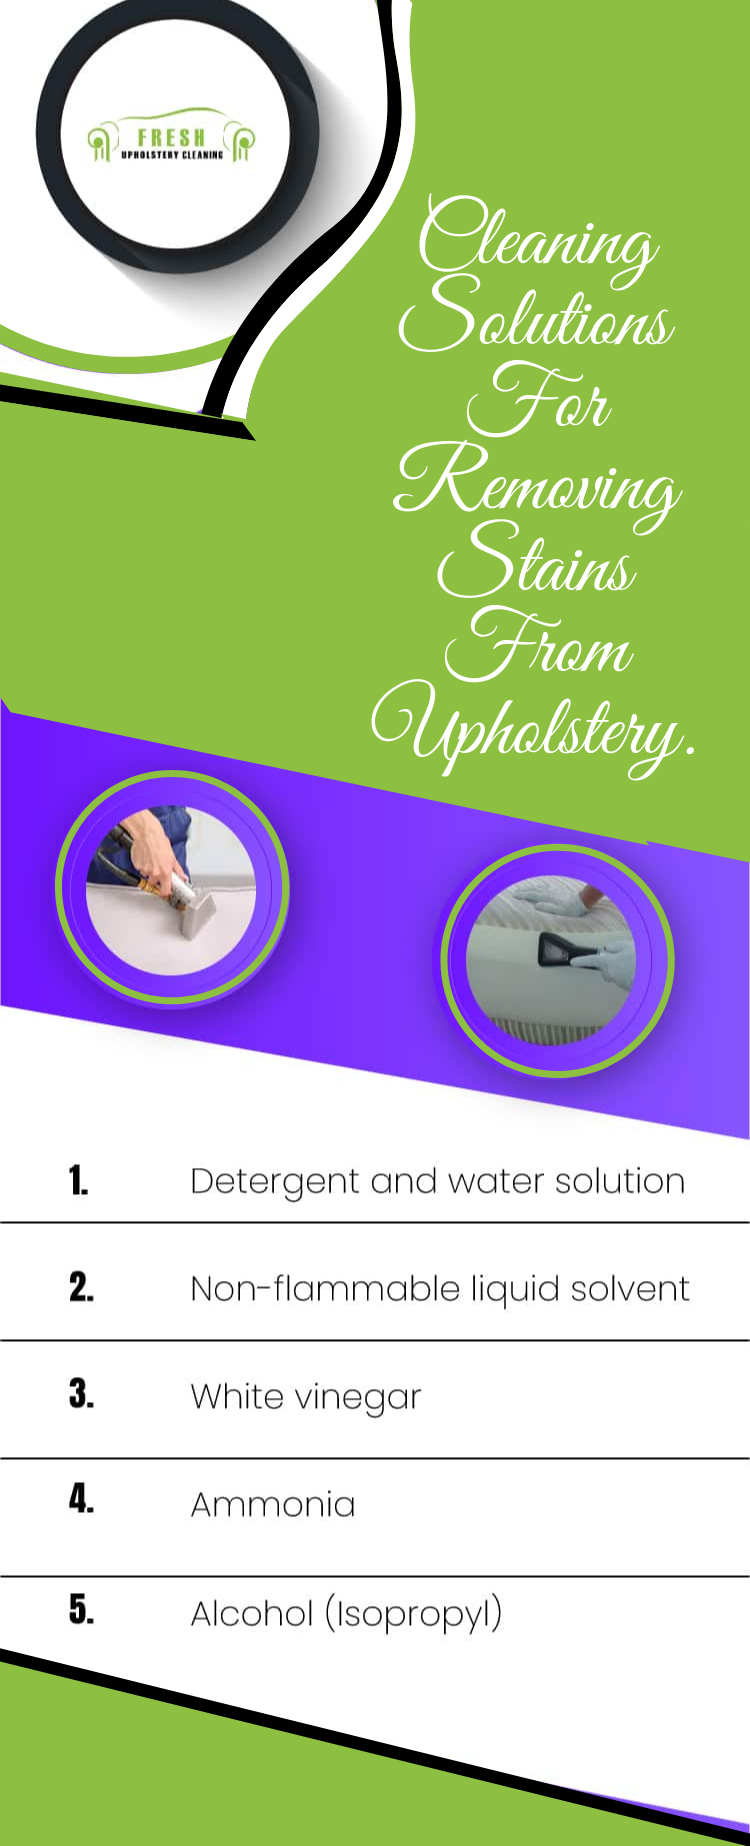 Removing Stains From Upholstery